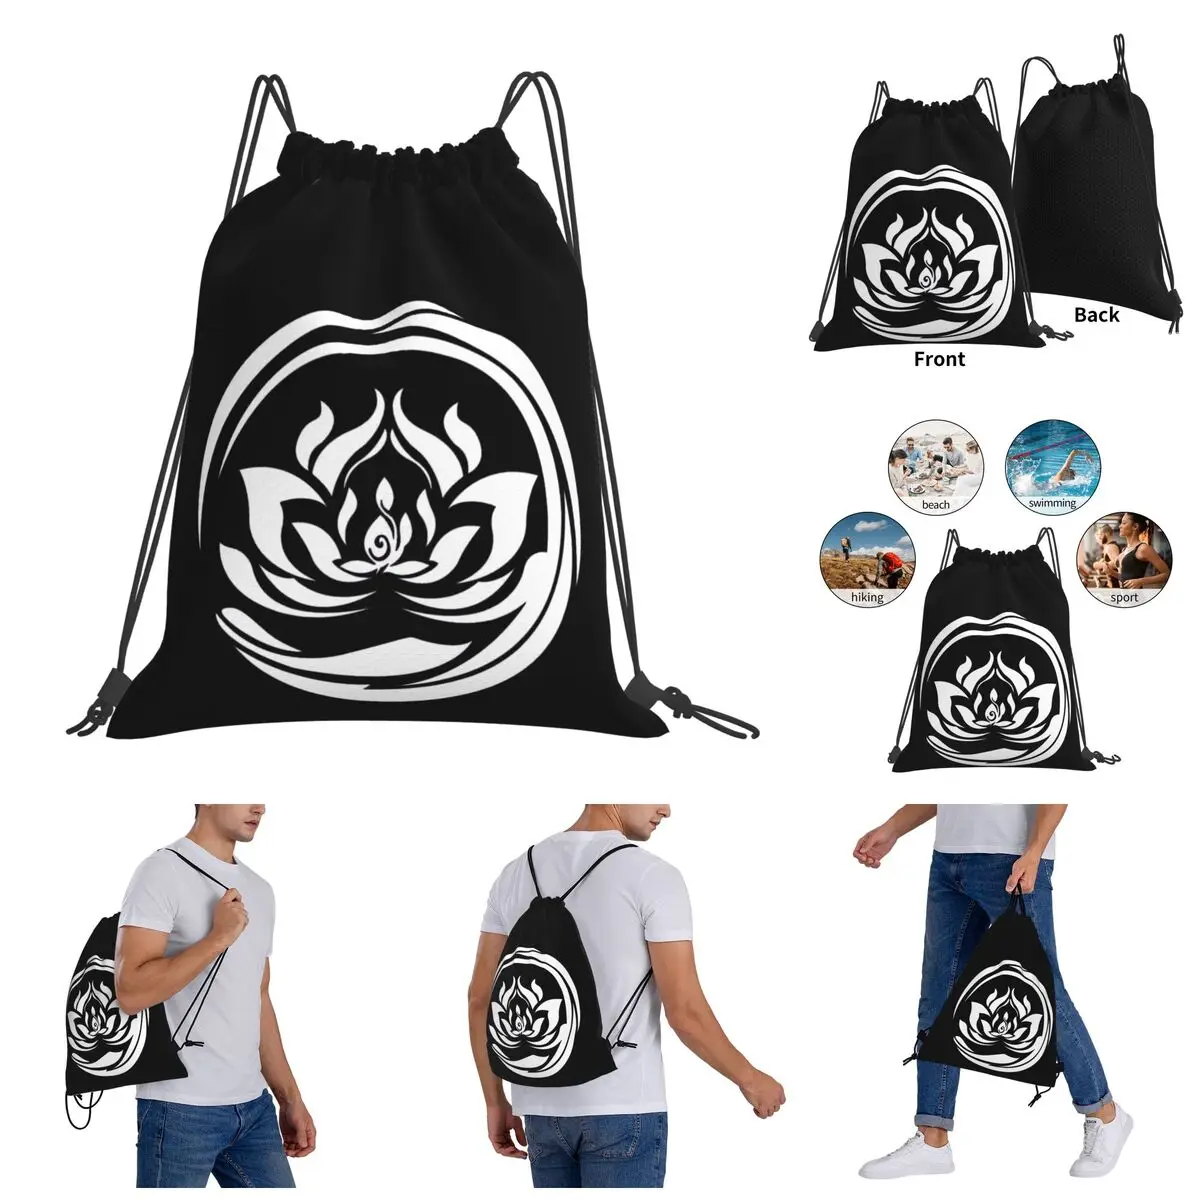 

Drawstring Bags Gym Bag The Untamed Yunmeng Jiang Sect The Untamed Backpack Funny Sarcastic Graphic Cool Knapsack